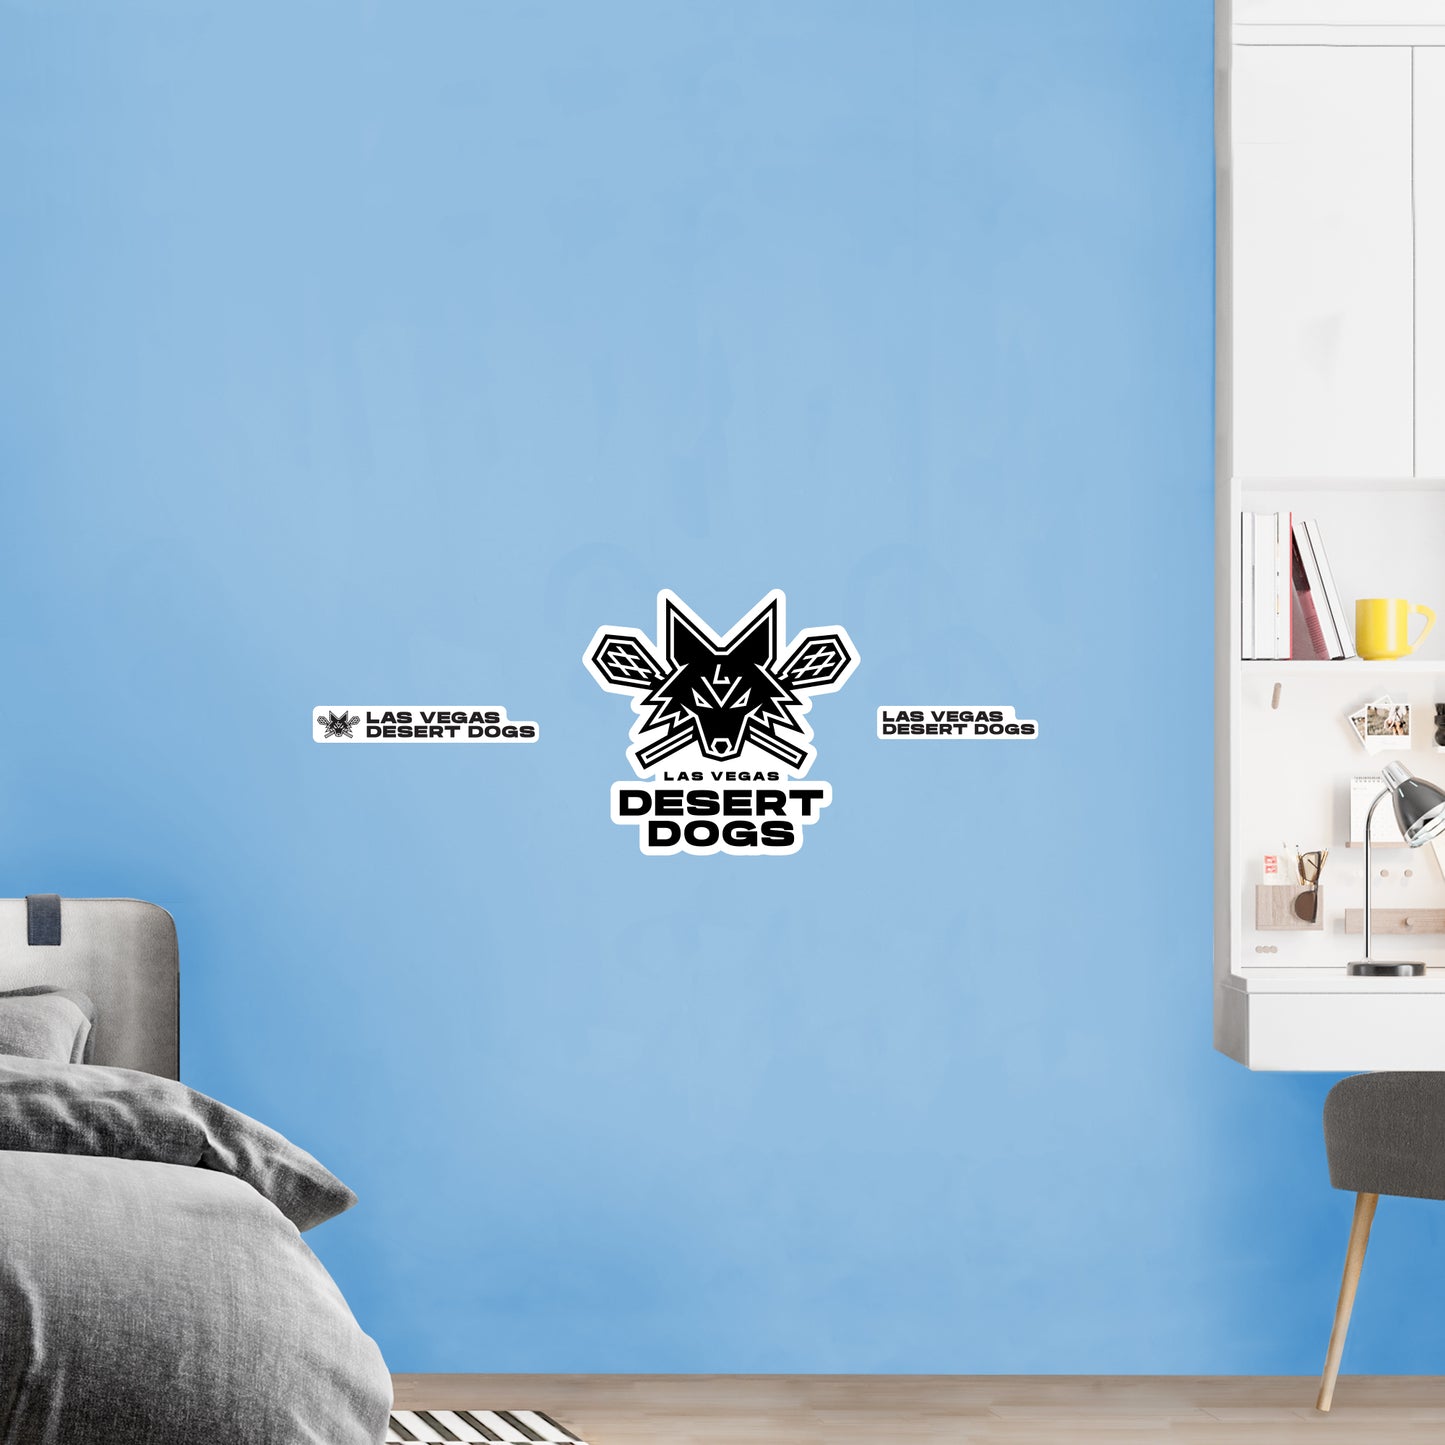 Las Vegas Desert Dogs:   Logo        - Officially Licensed NLL Removable     Adhesive Decal